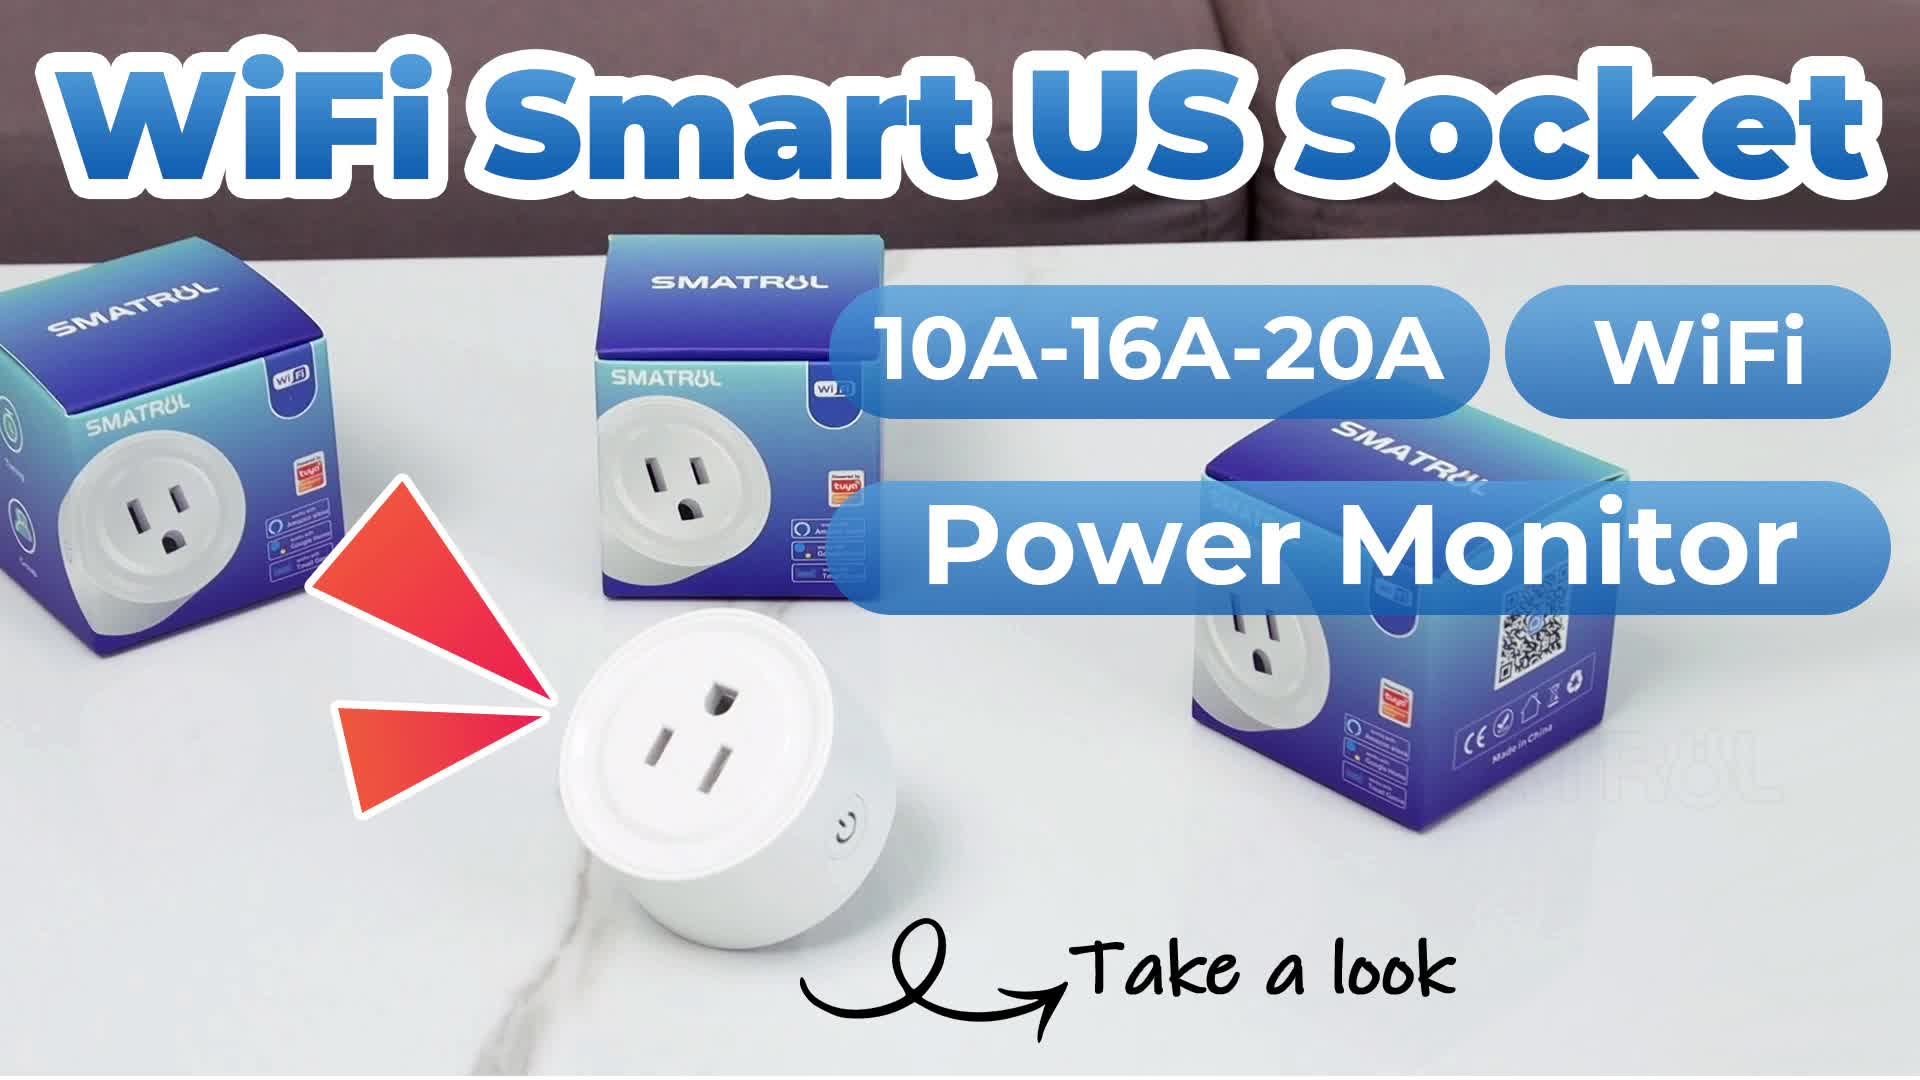 4PCS Smart Sockets Remote Control Outlet with Timing Function,EU Plug